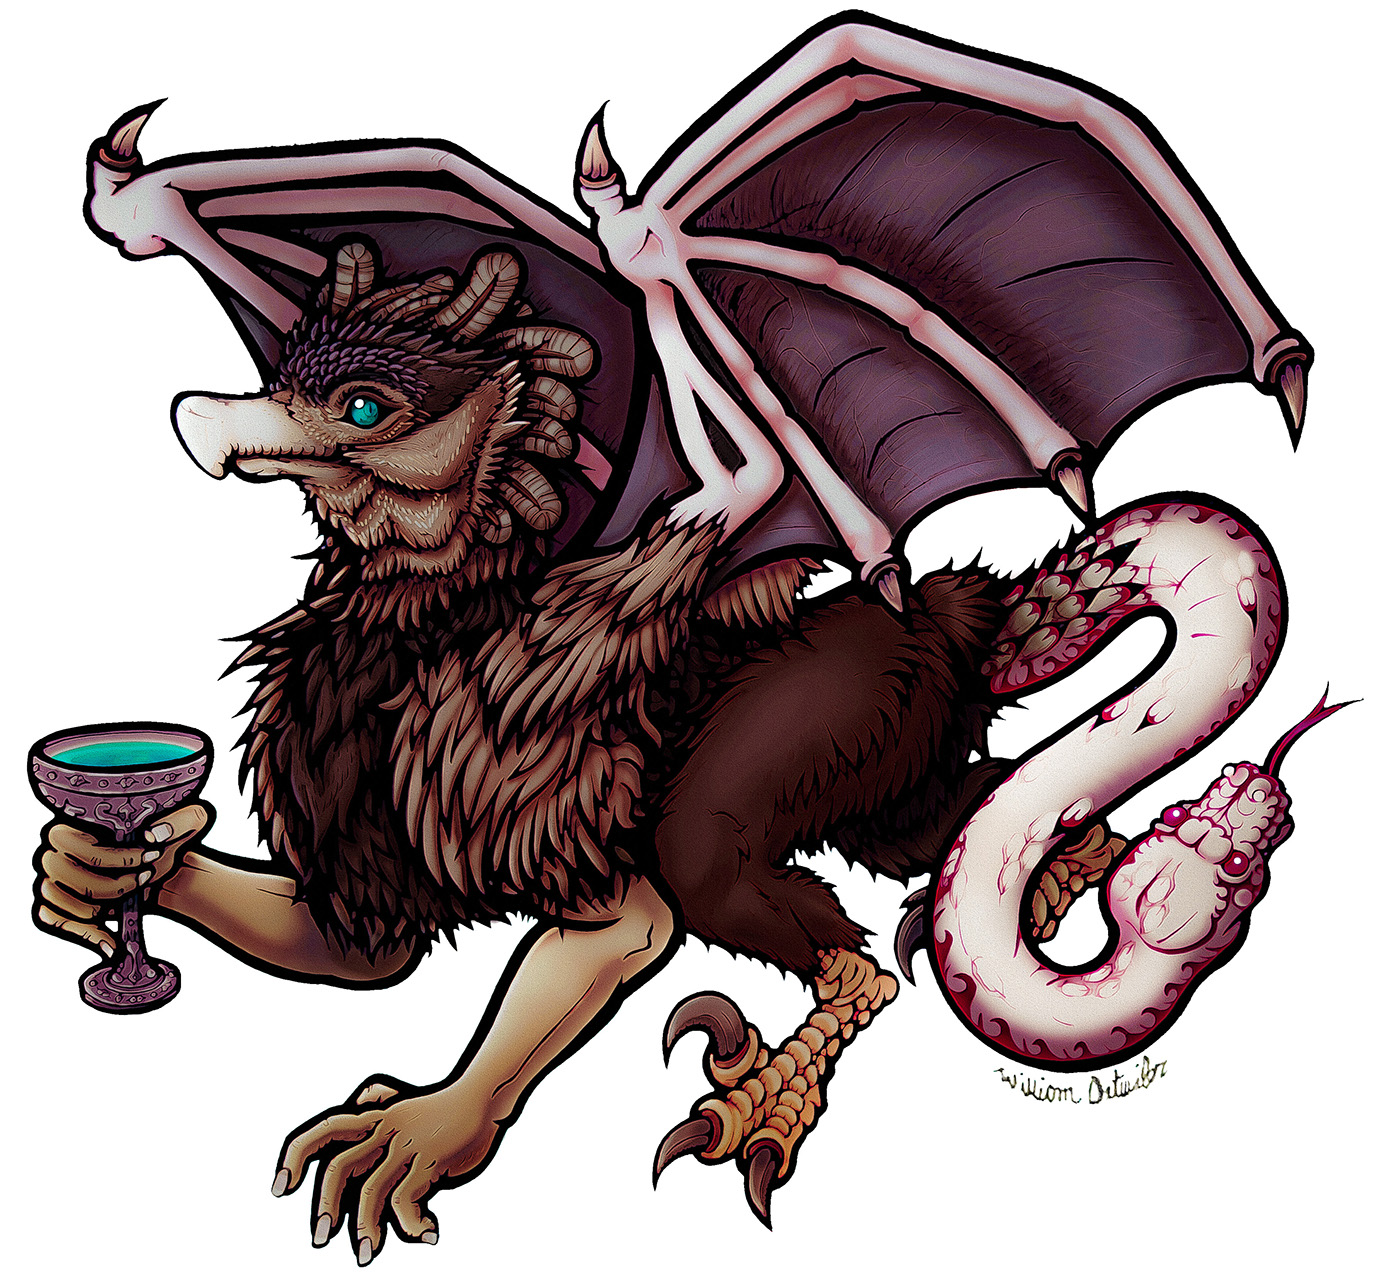 androgryph gryphon Griffin sphinx chimera william detwiler